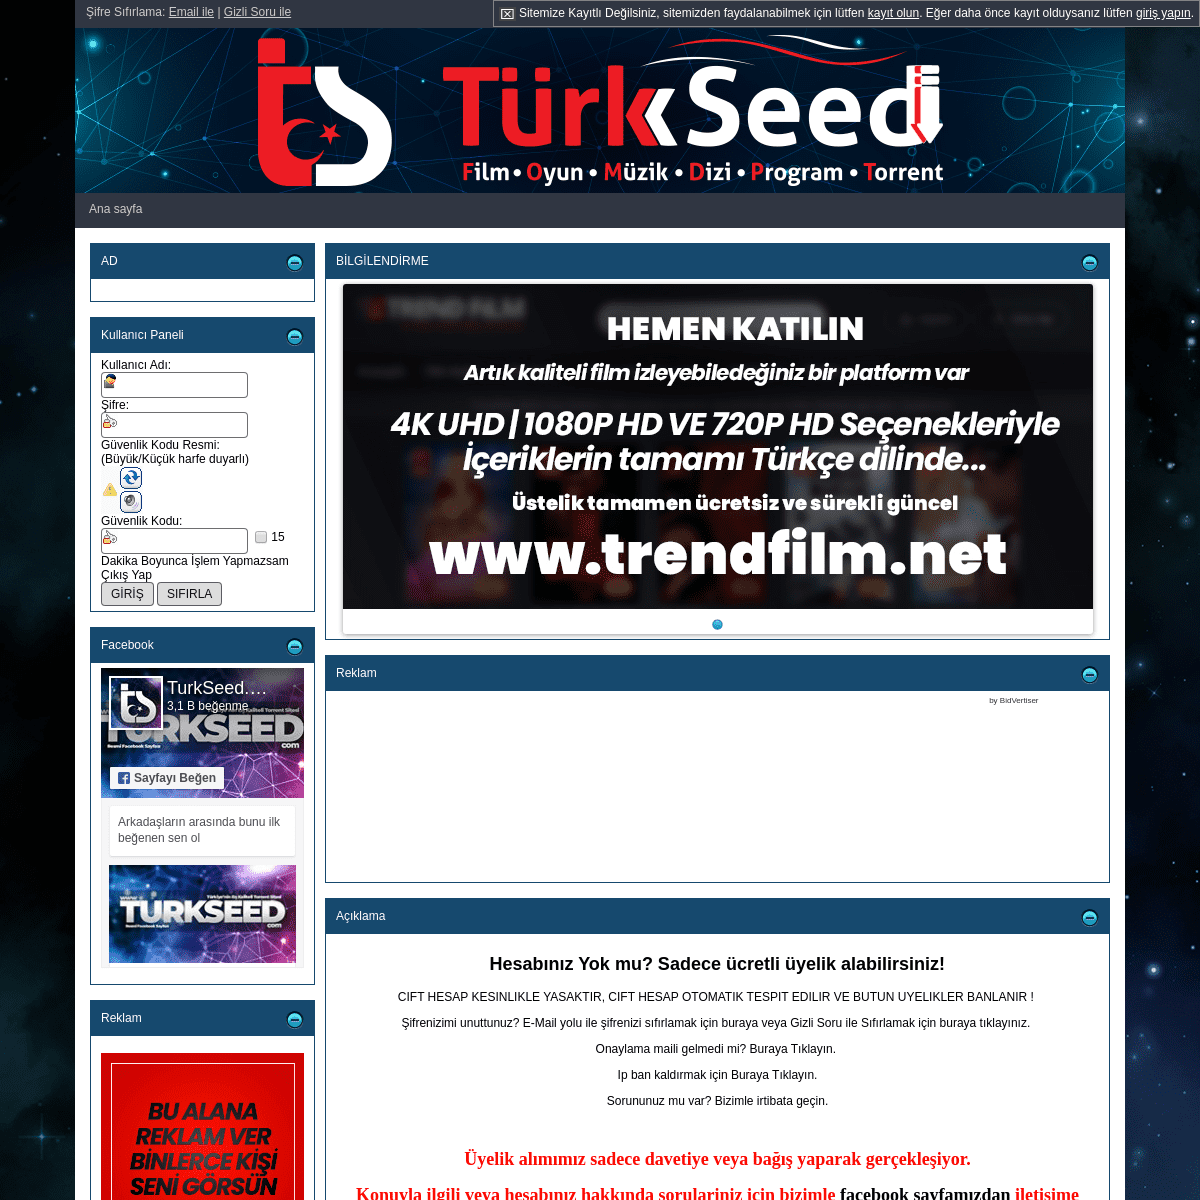 A complete backup of turkseed.com